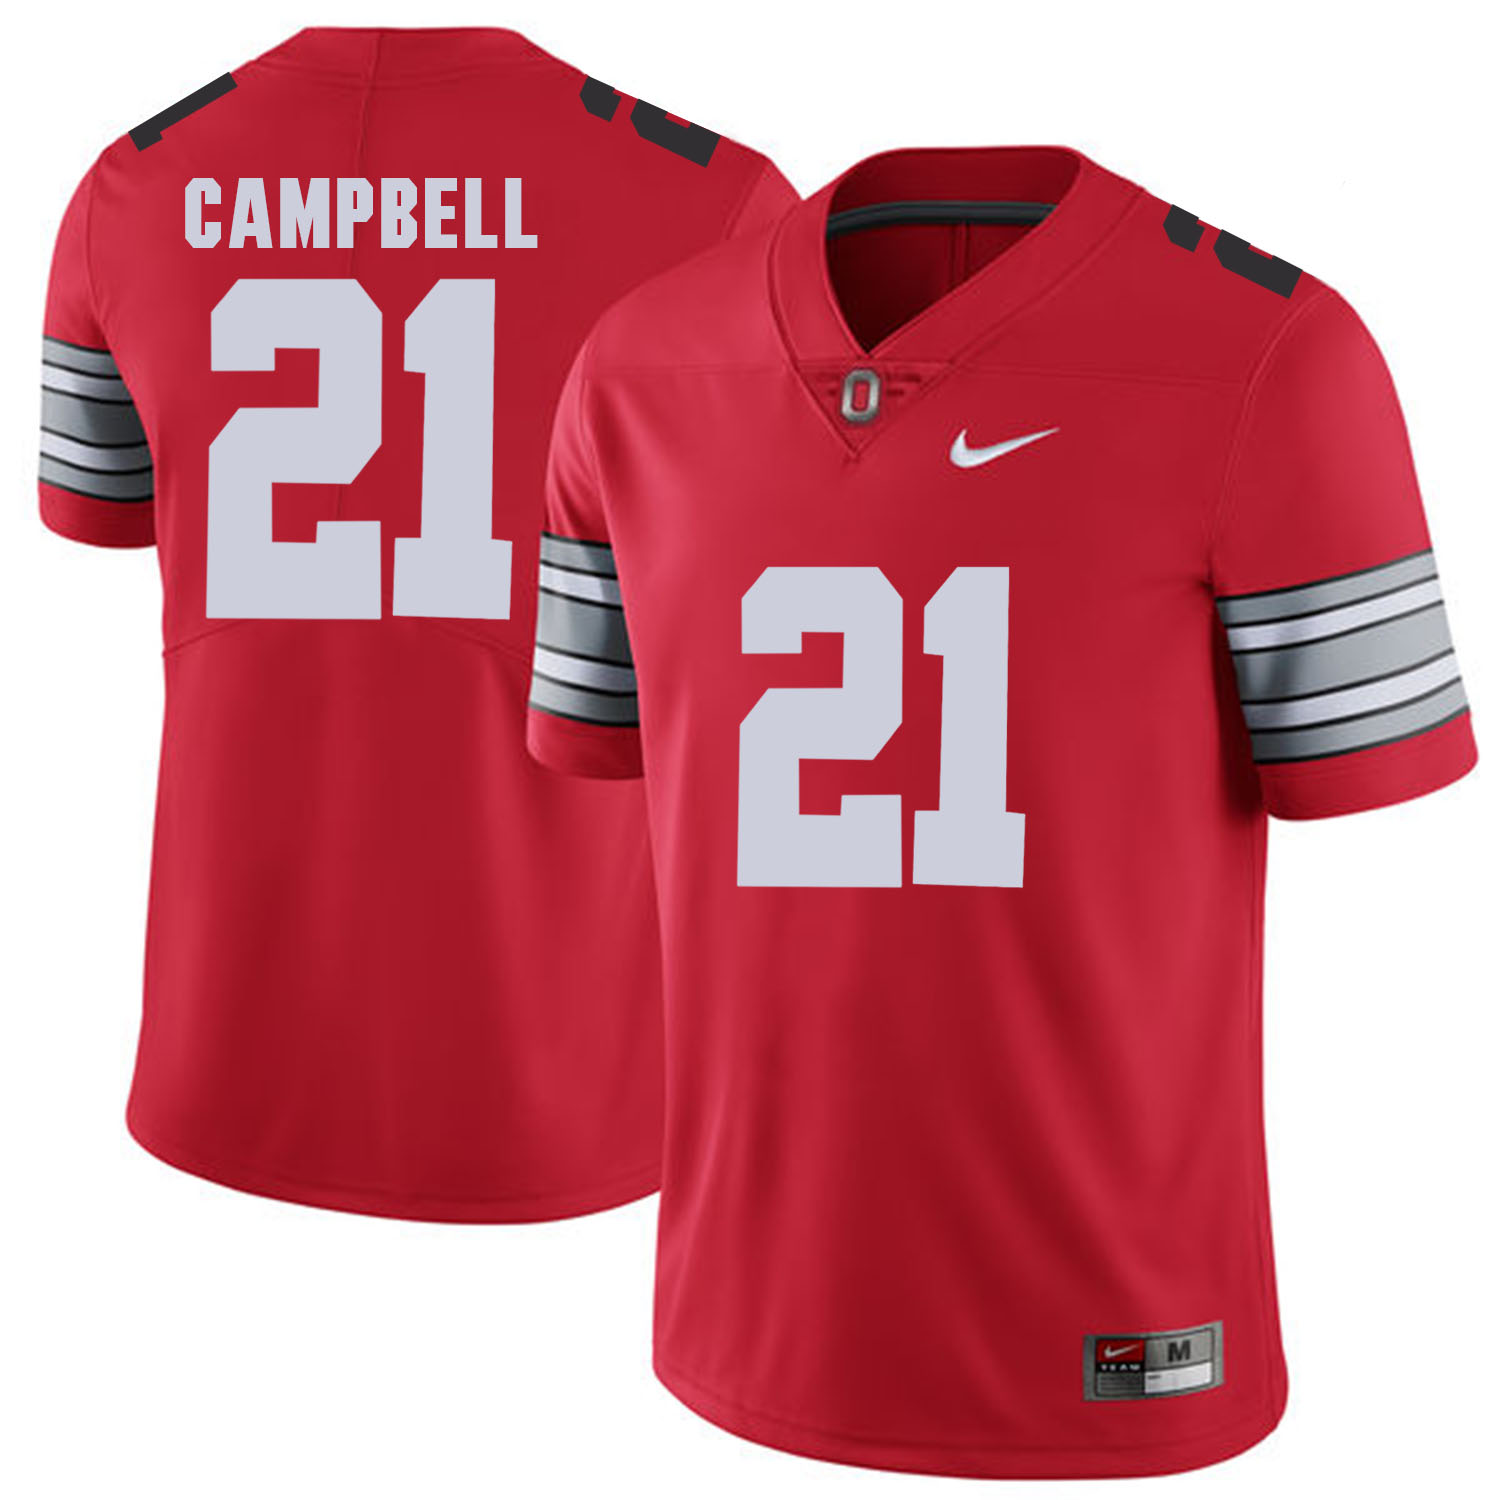 Men Ohio State 21 Gampbell Red Customized NCAA Jerseys